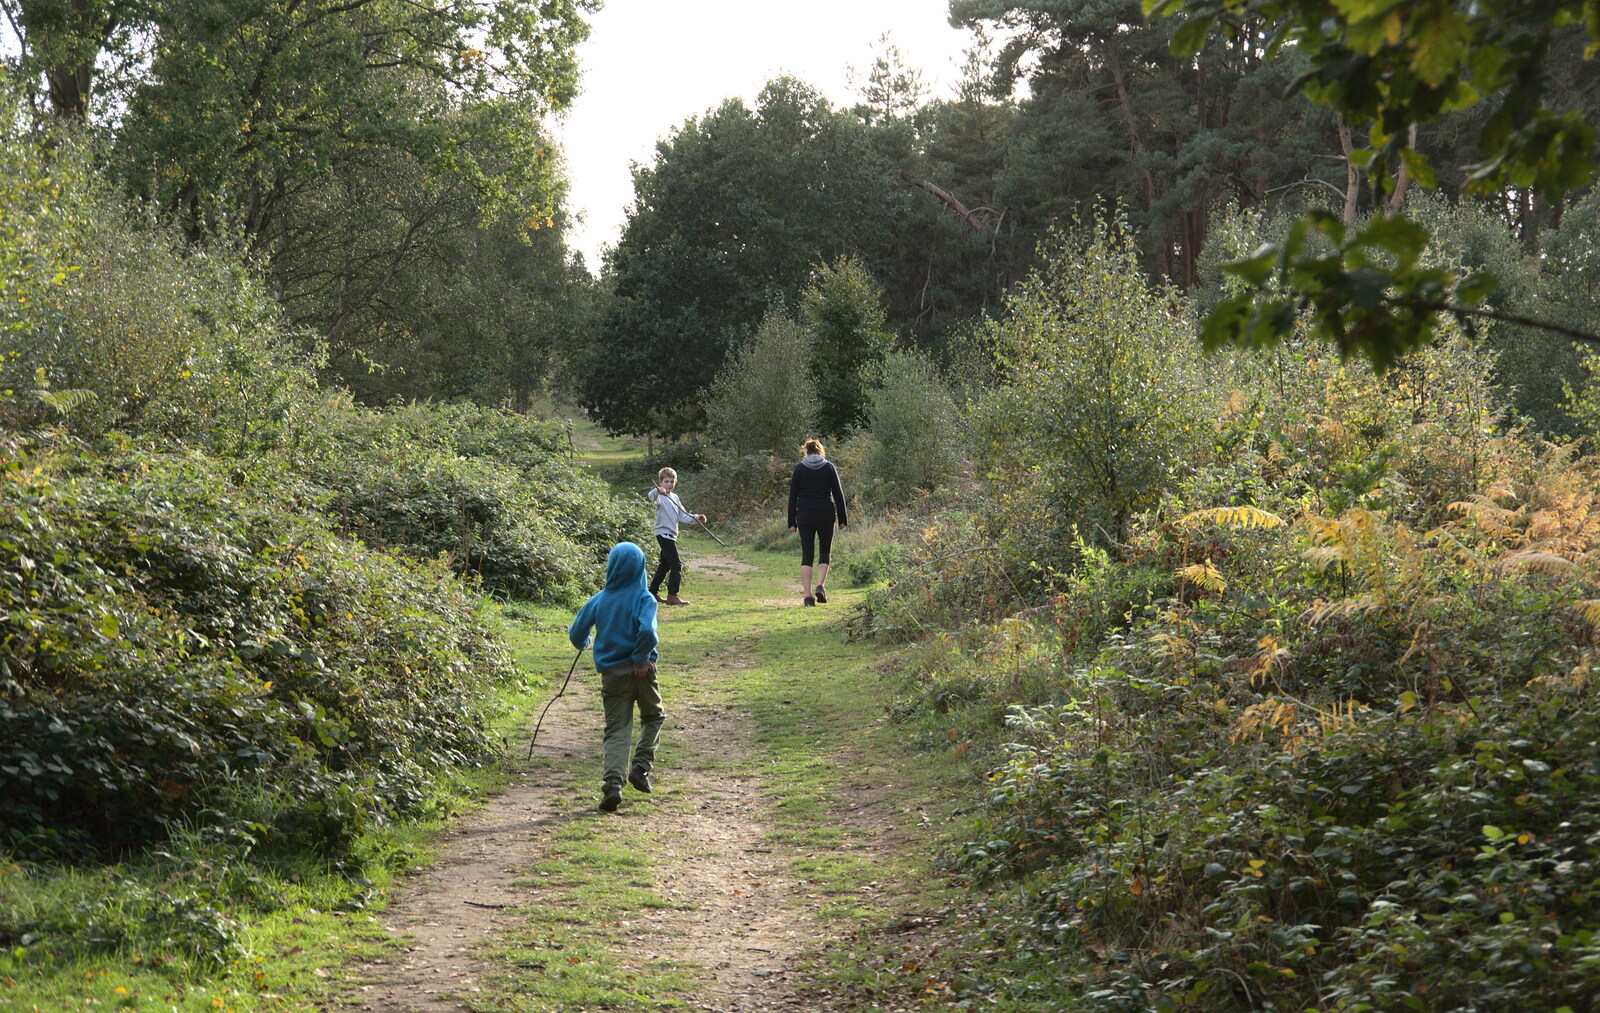 Harry runs off down the path from Evidence of Autumn: Geocaching on Knettishall Heath, Suffolk - 7th October 2018